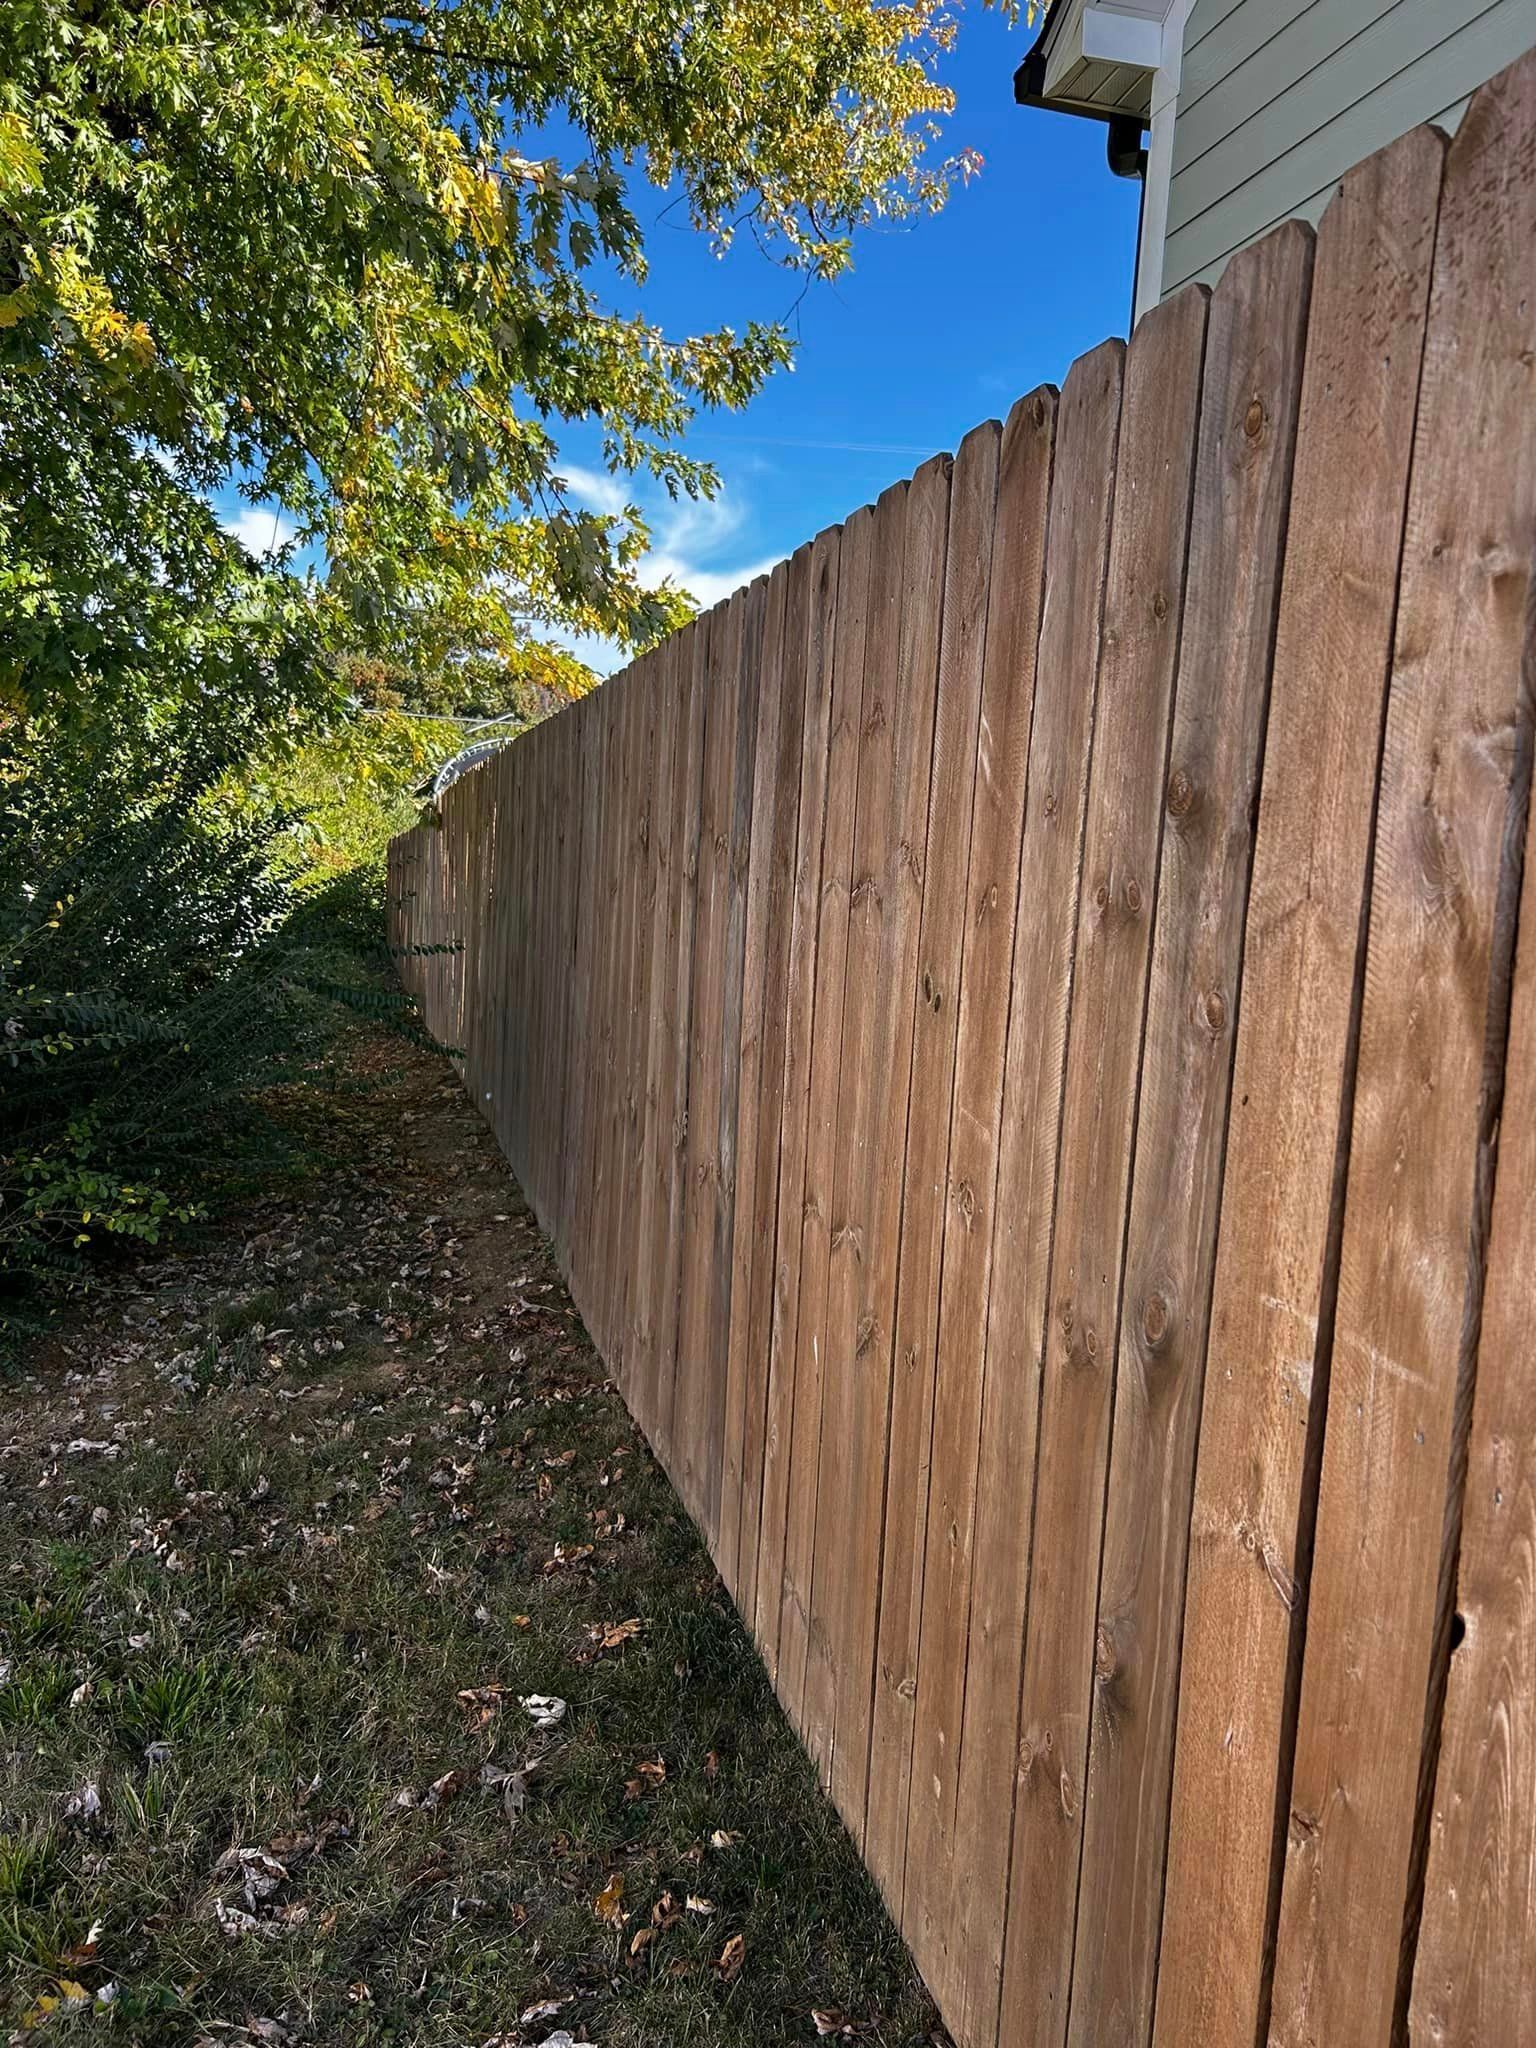 a wooden fence is surrounded by trees and grass in front of a house .